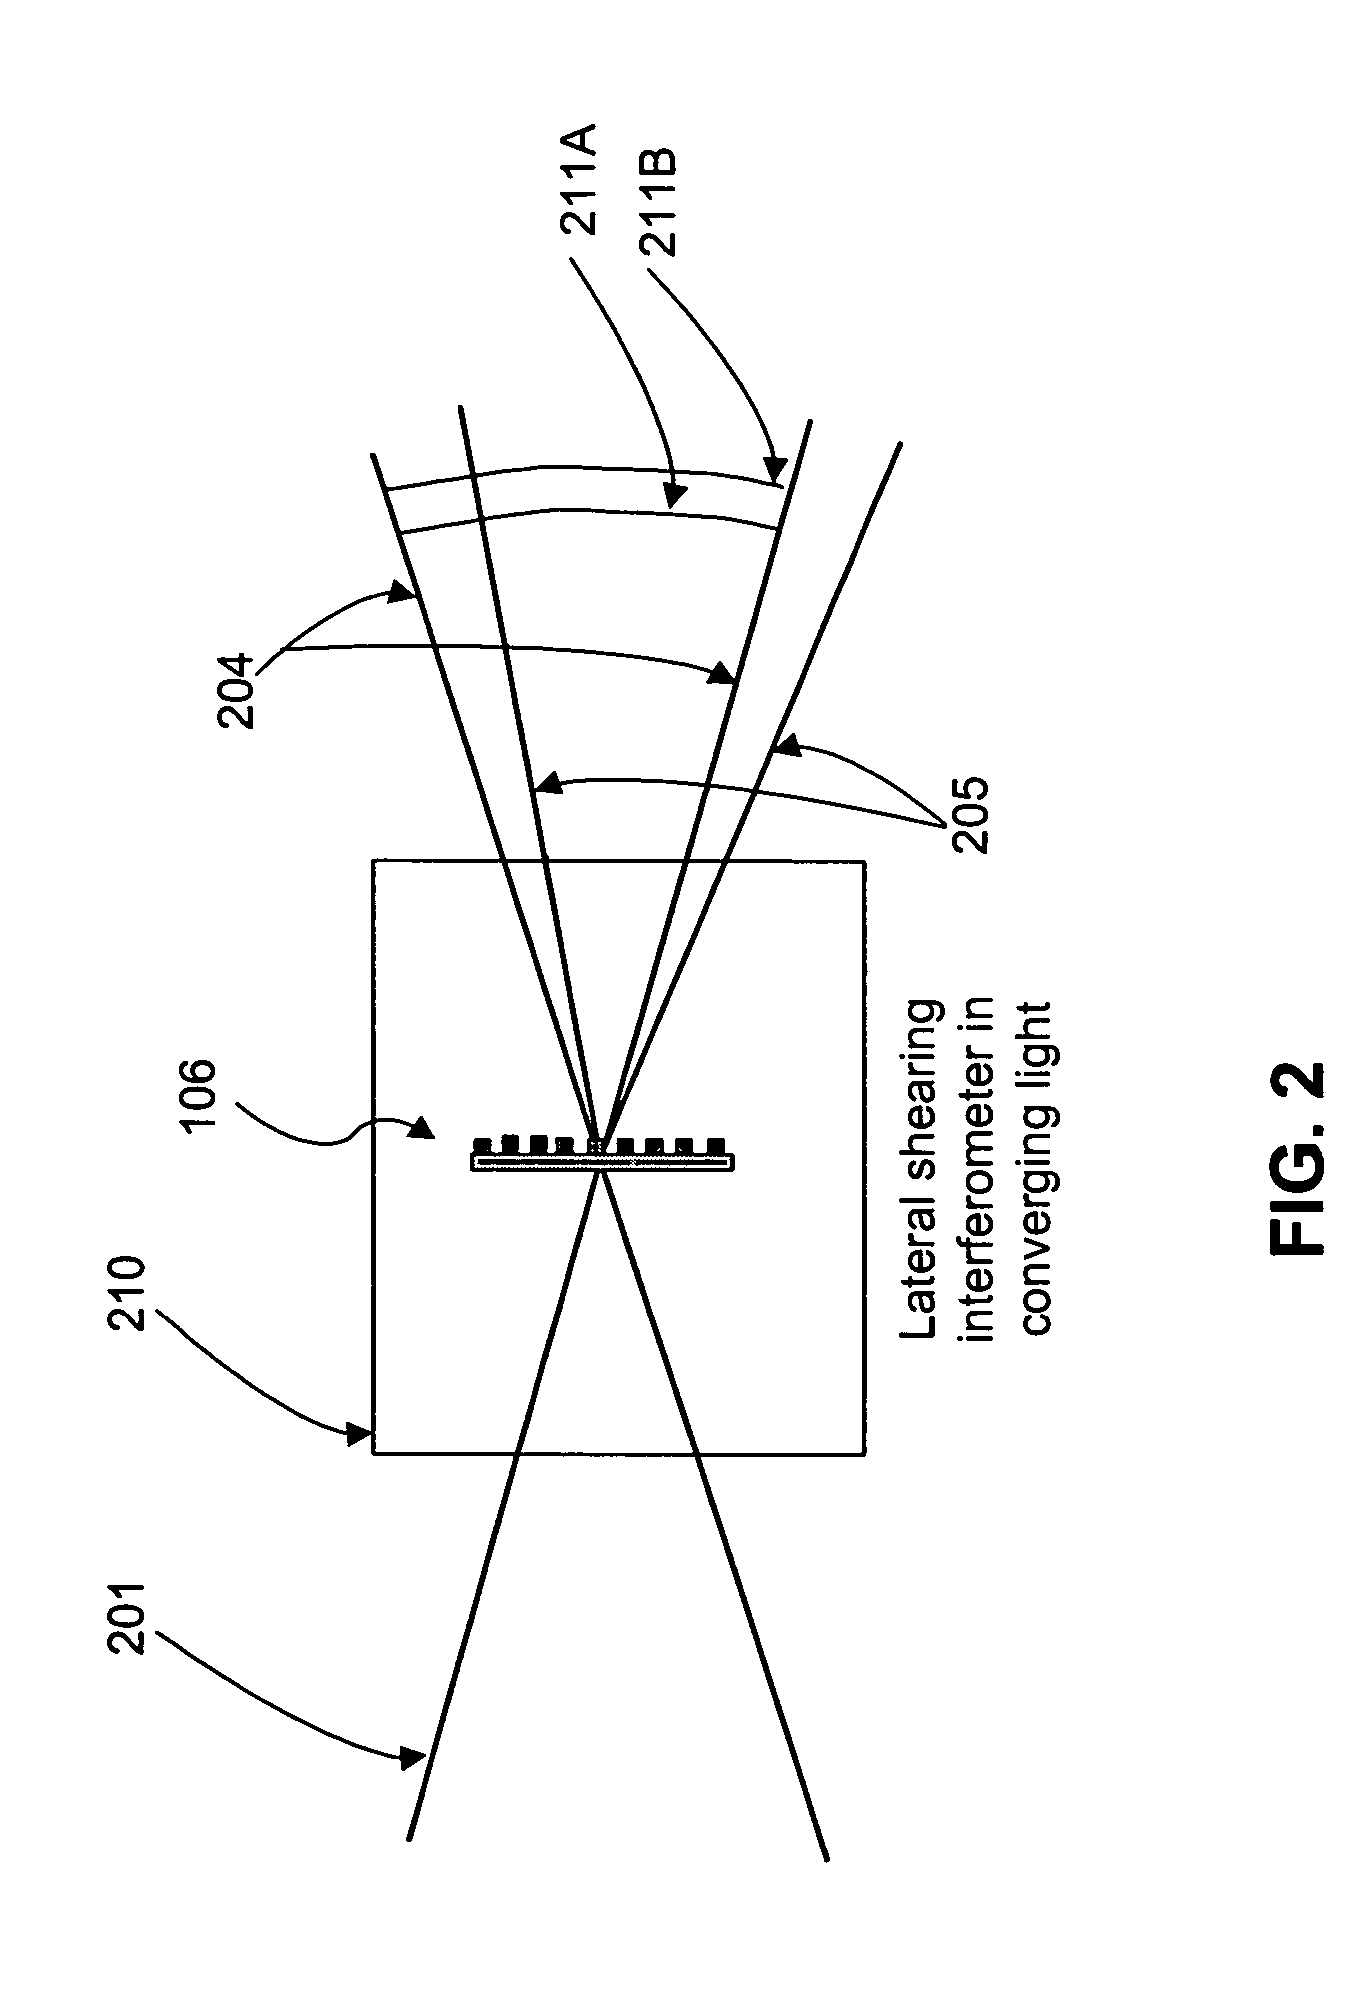 Shearing interferometer with dynamic pupil fill